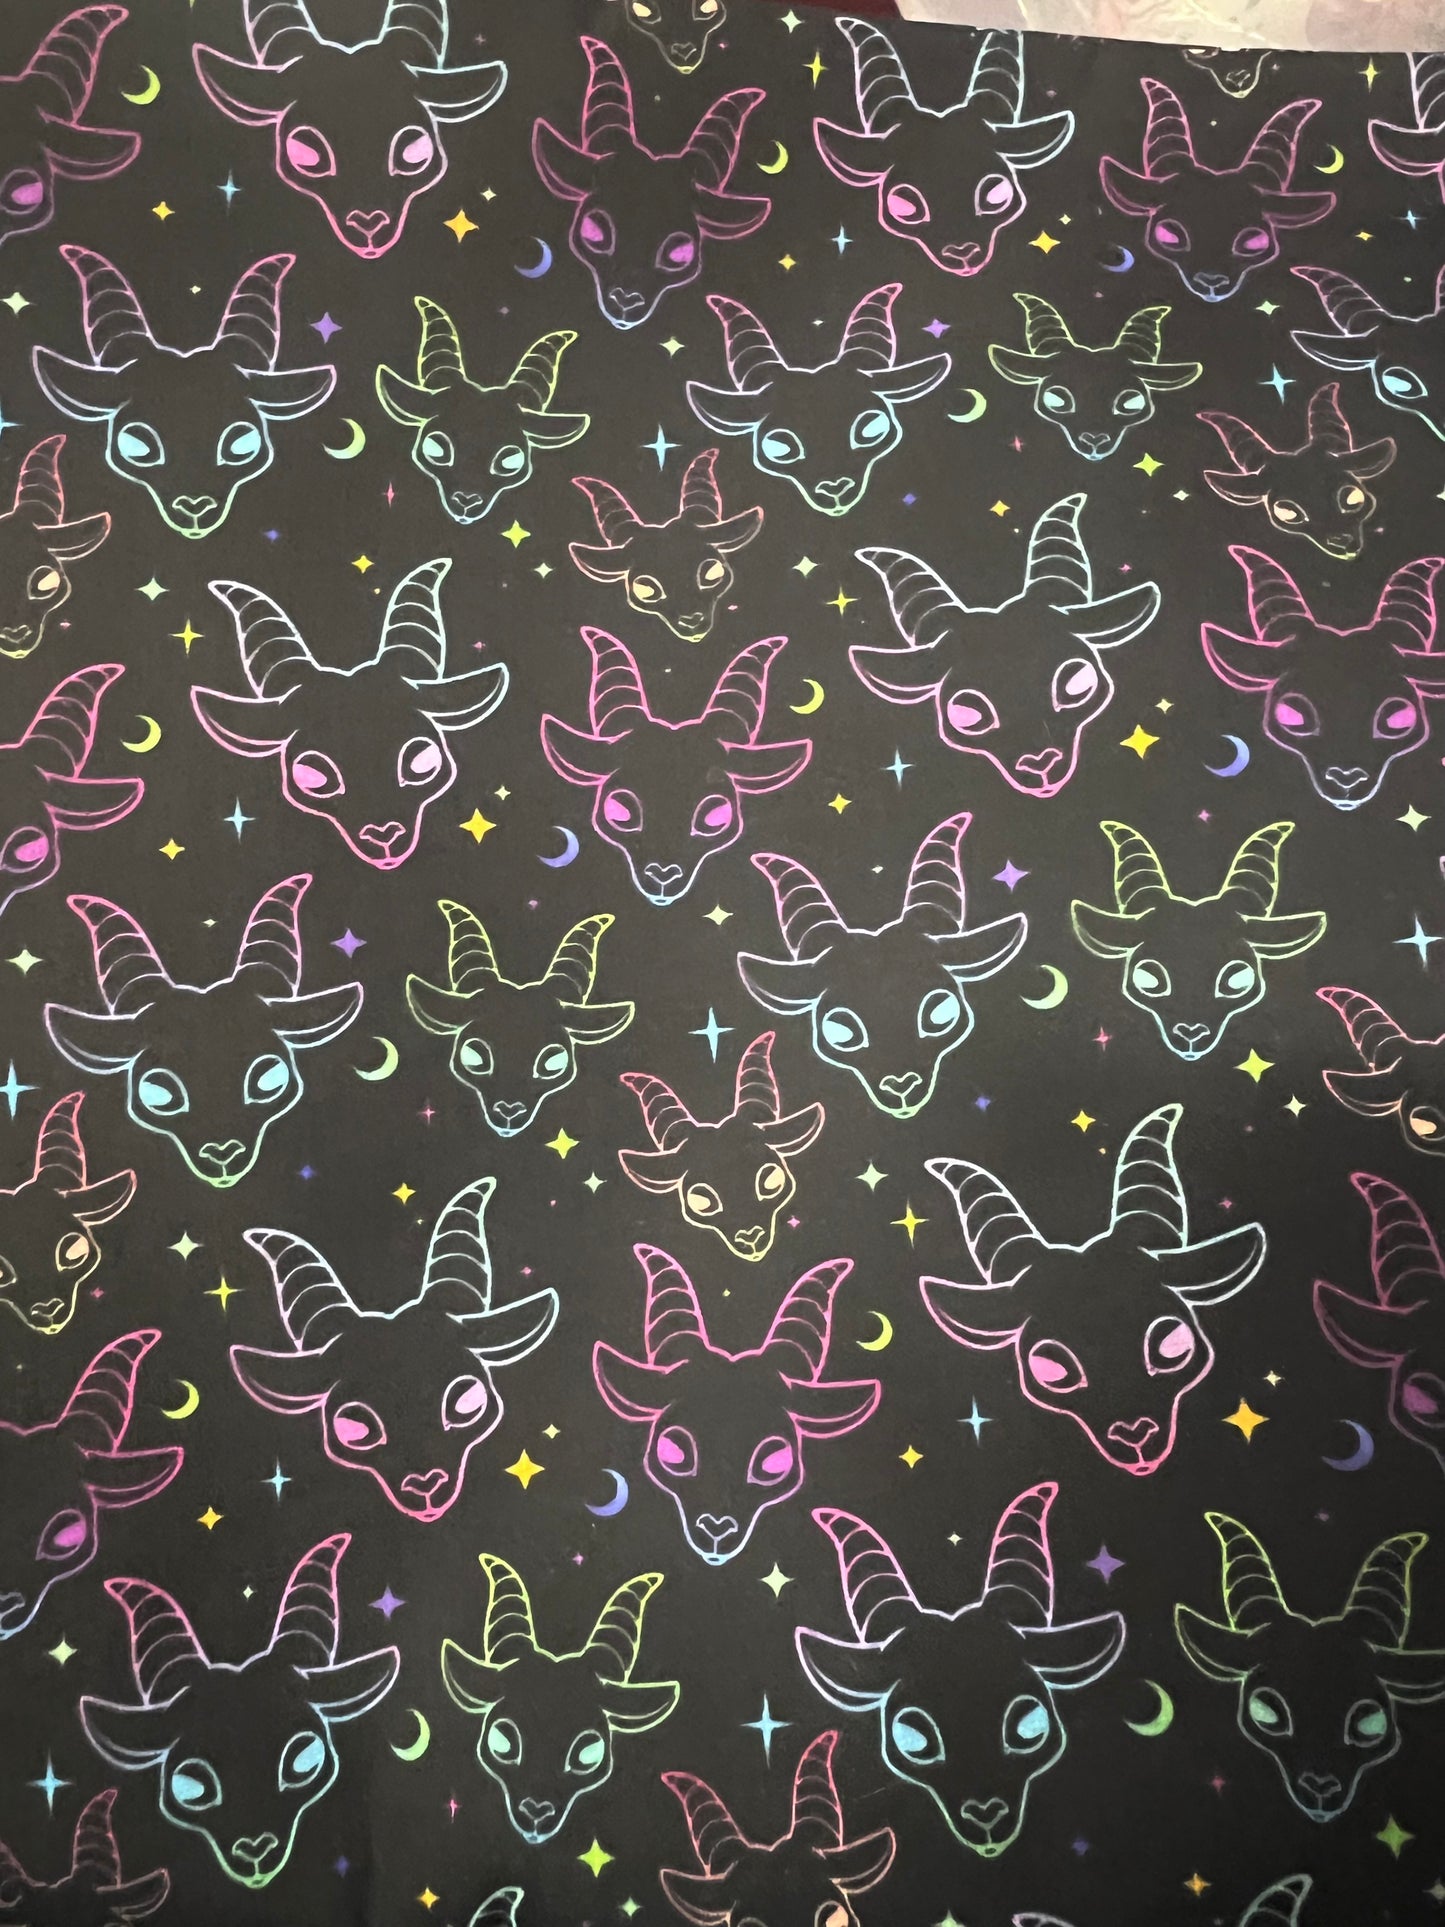 NEON BAPHOMET GOAT - Polycotton Fabric from Japan